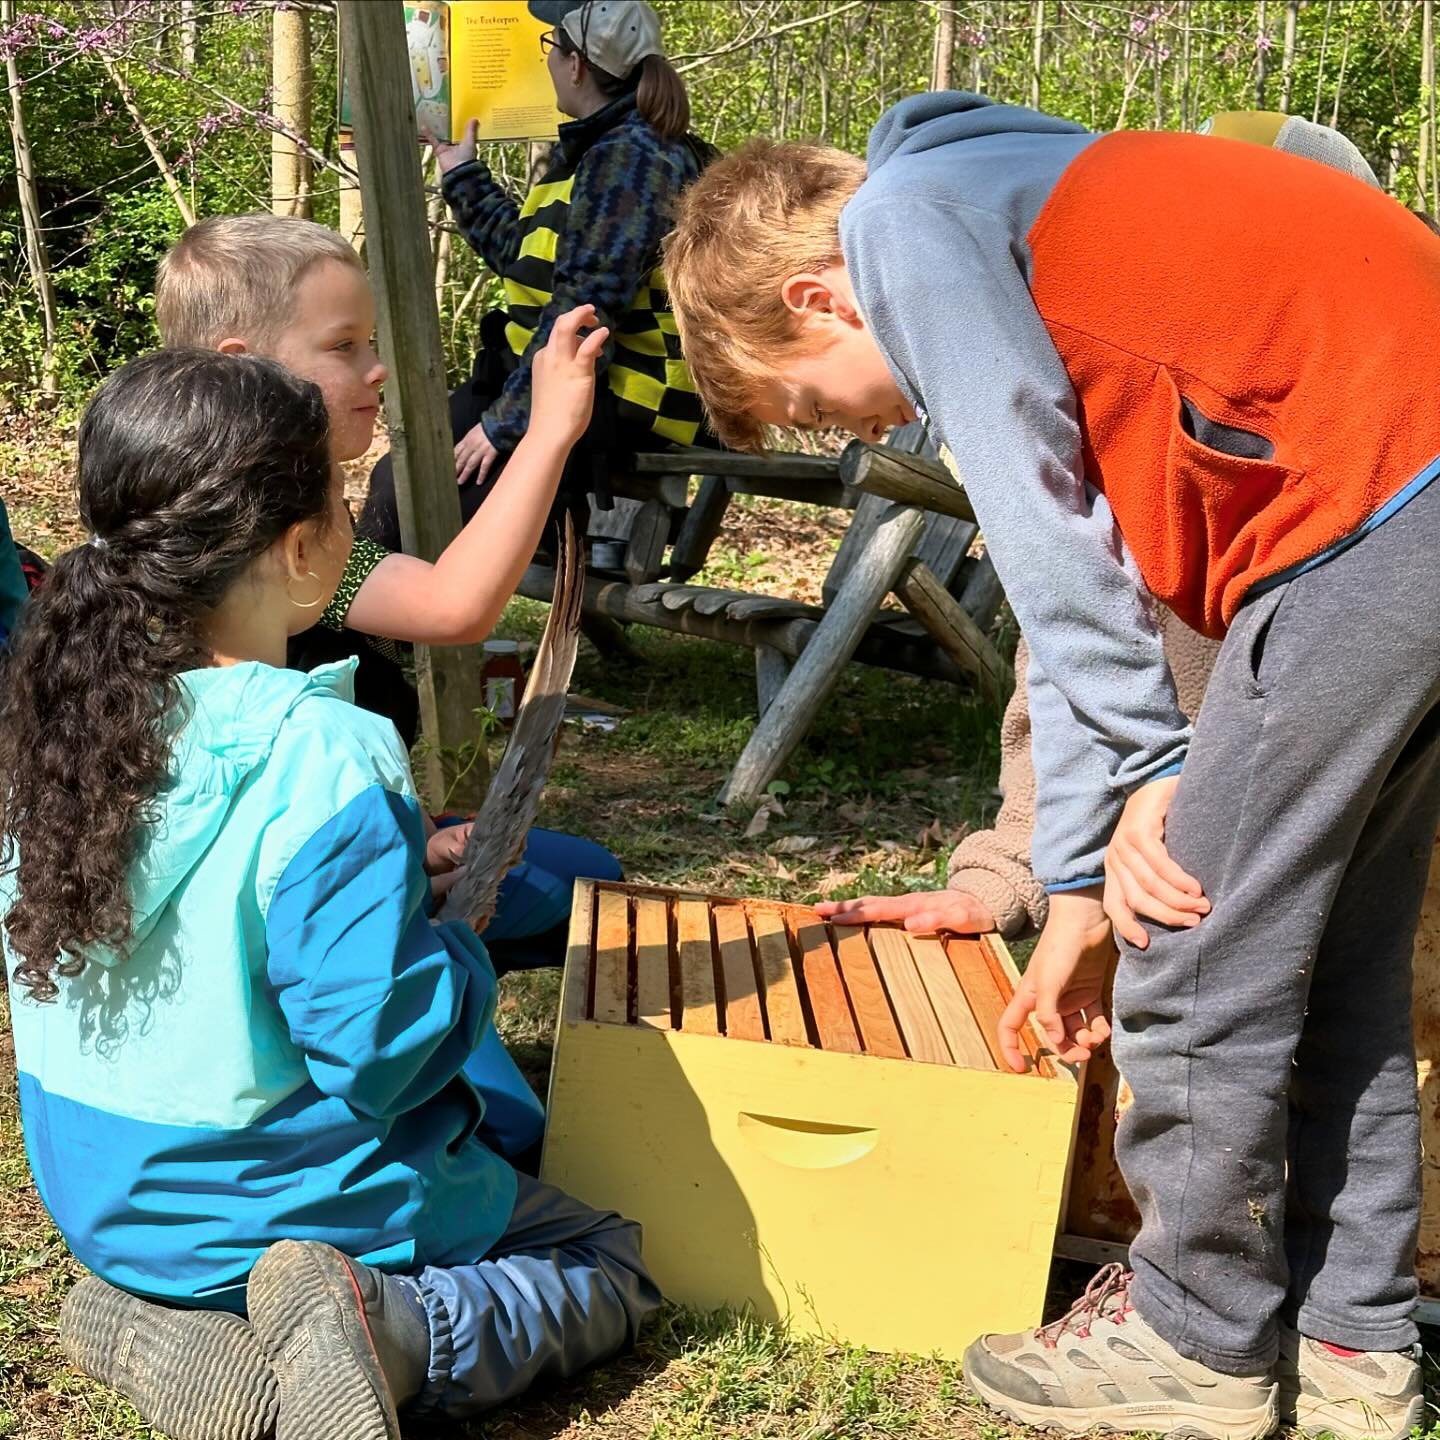 It was a wonderful day to wrap up our Earth Day celebrations this week with our Forest Friday students while learning about bees! The day began with some exploration of beekeeping tools and supplies, including trying out a beekeepers suit and smoker!